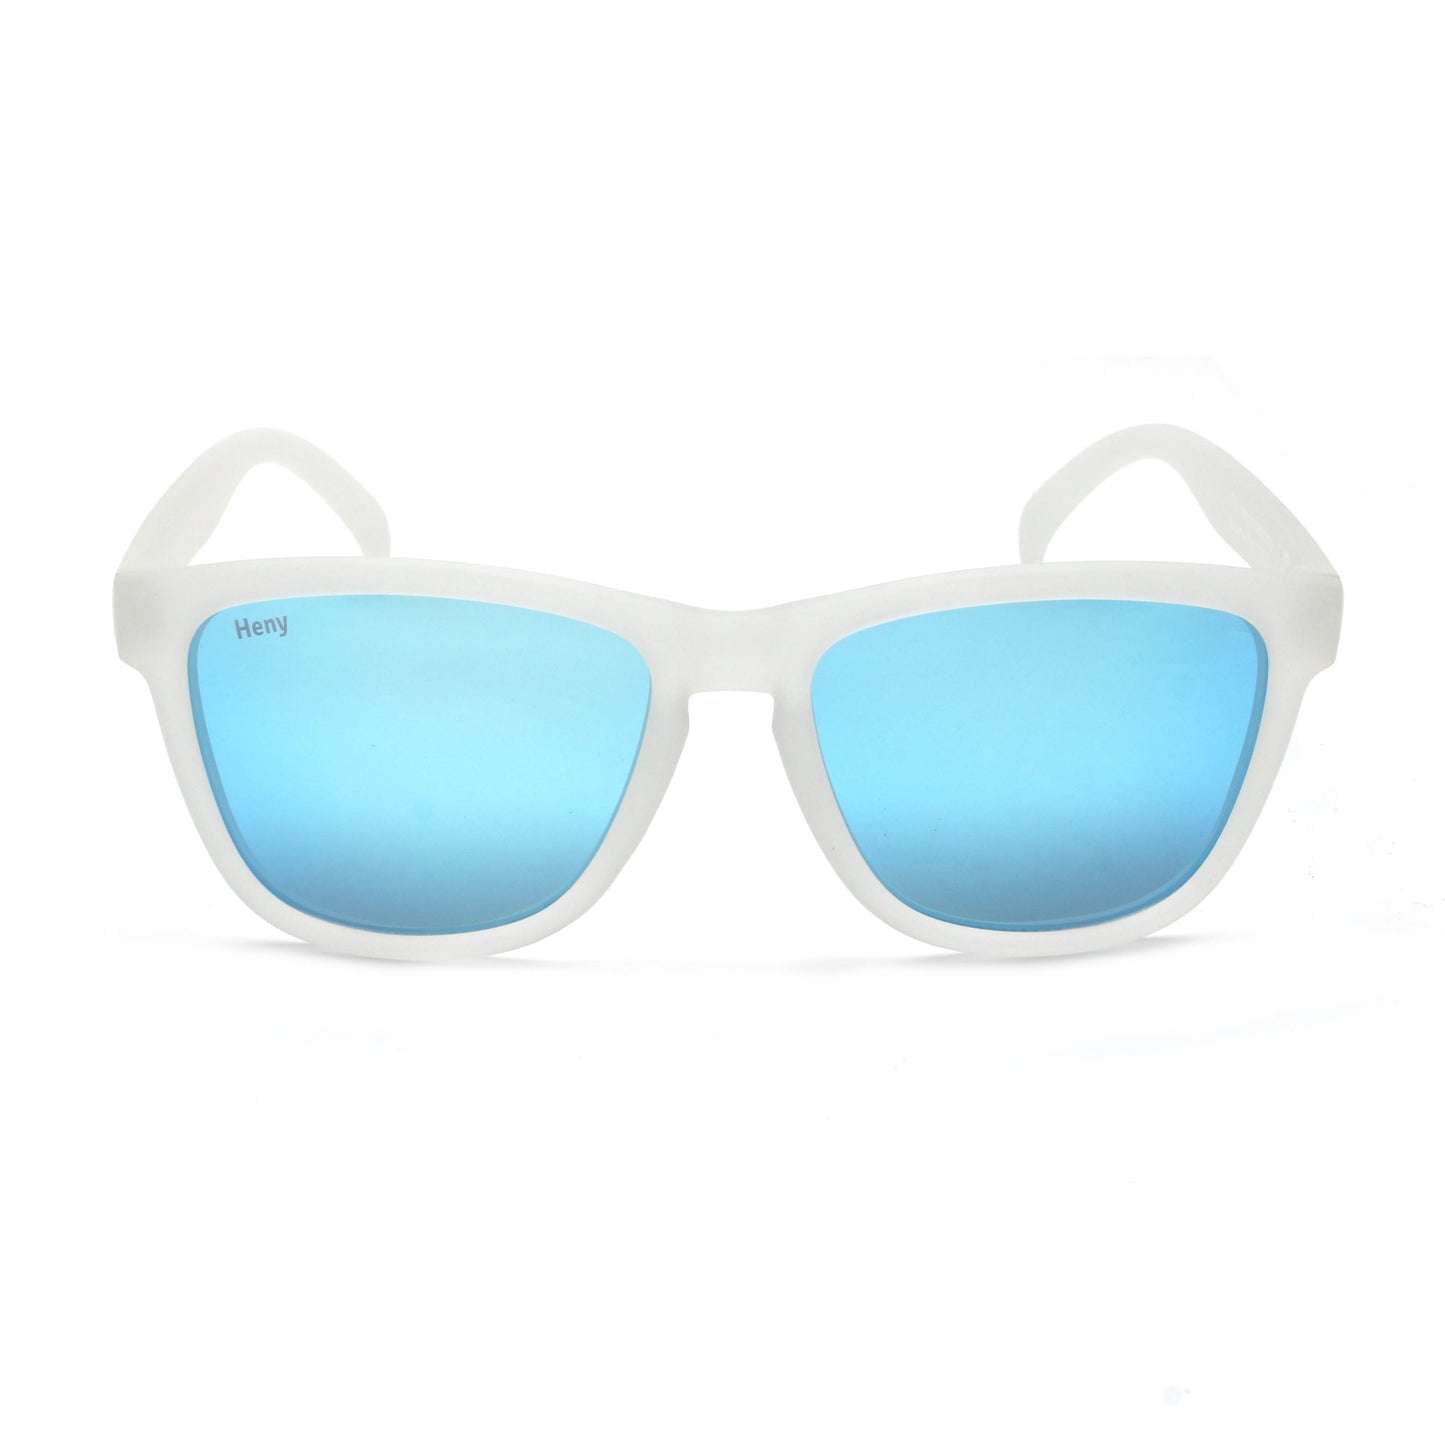 Front view of the UV400 Polarized Blue View Heny Sunglasses